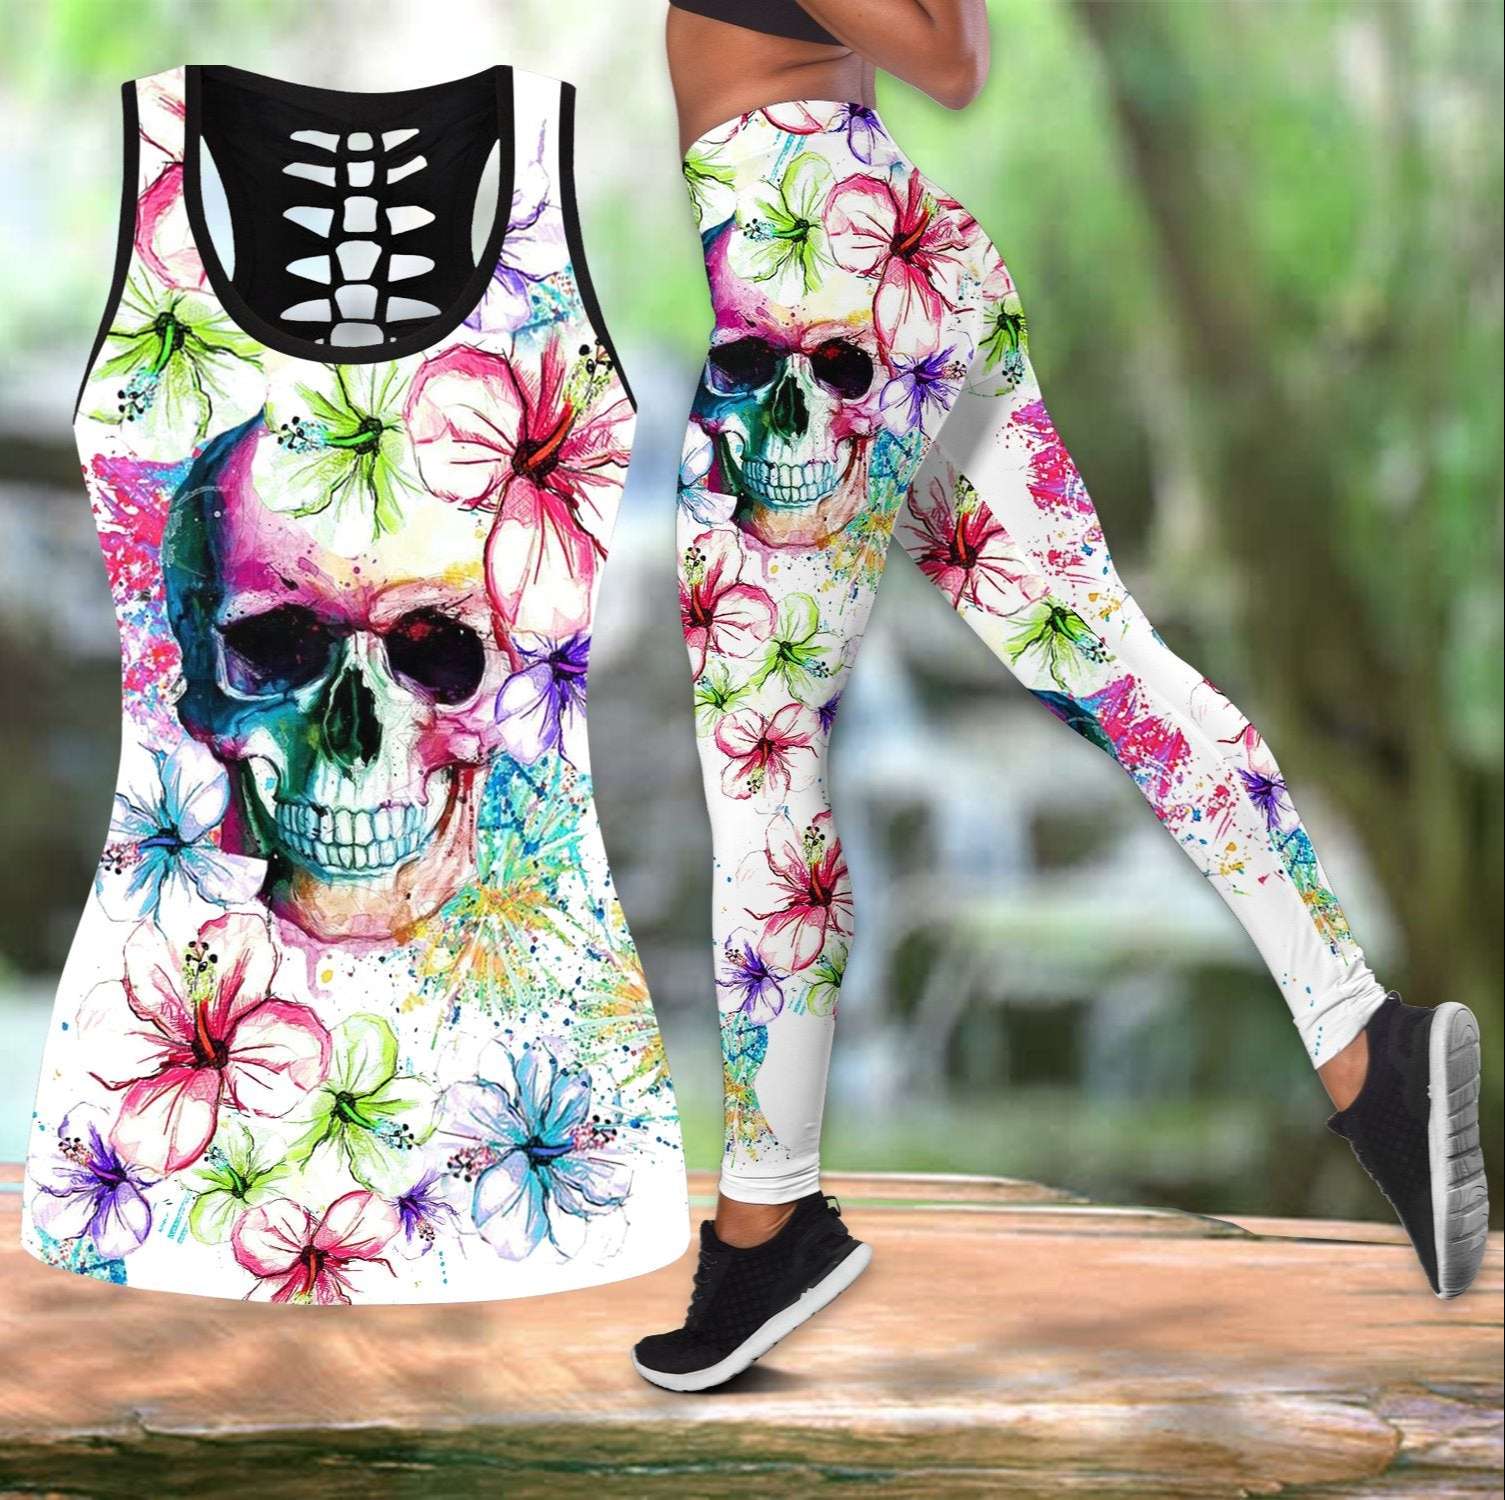 Generic Skull Combo Hollow Tank And Legging Outfit Print Yoga Set  Sleeveless Vest 6 Styles Summer Outfits For Women Plus Size Xs-8xl